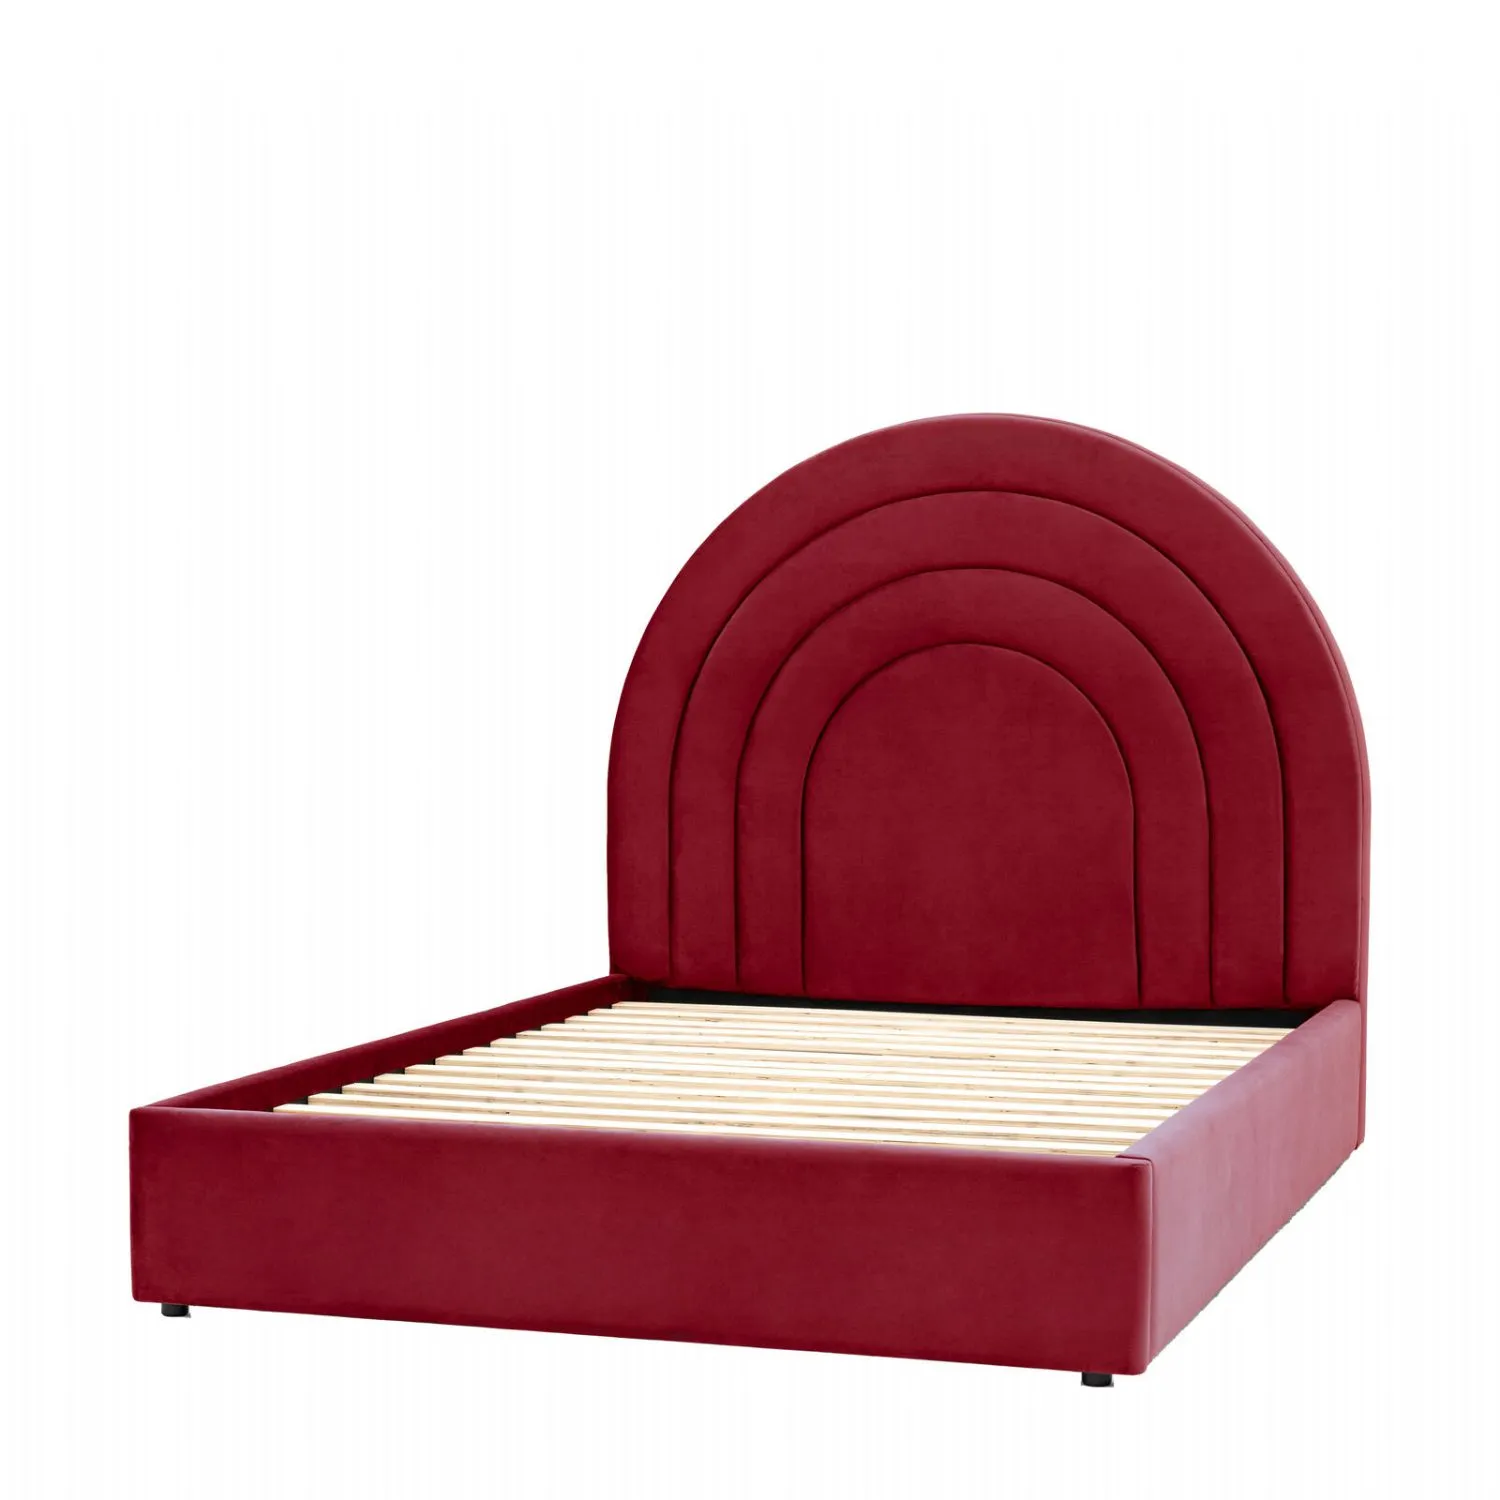 Retro Style Red Velvet Fabric Arched King Size Bed